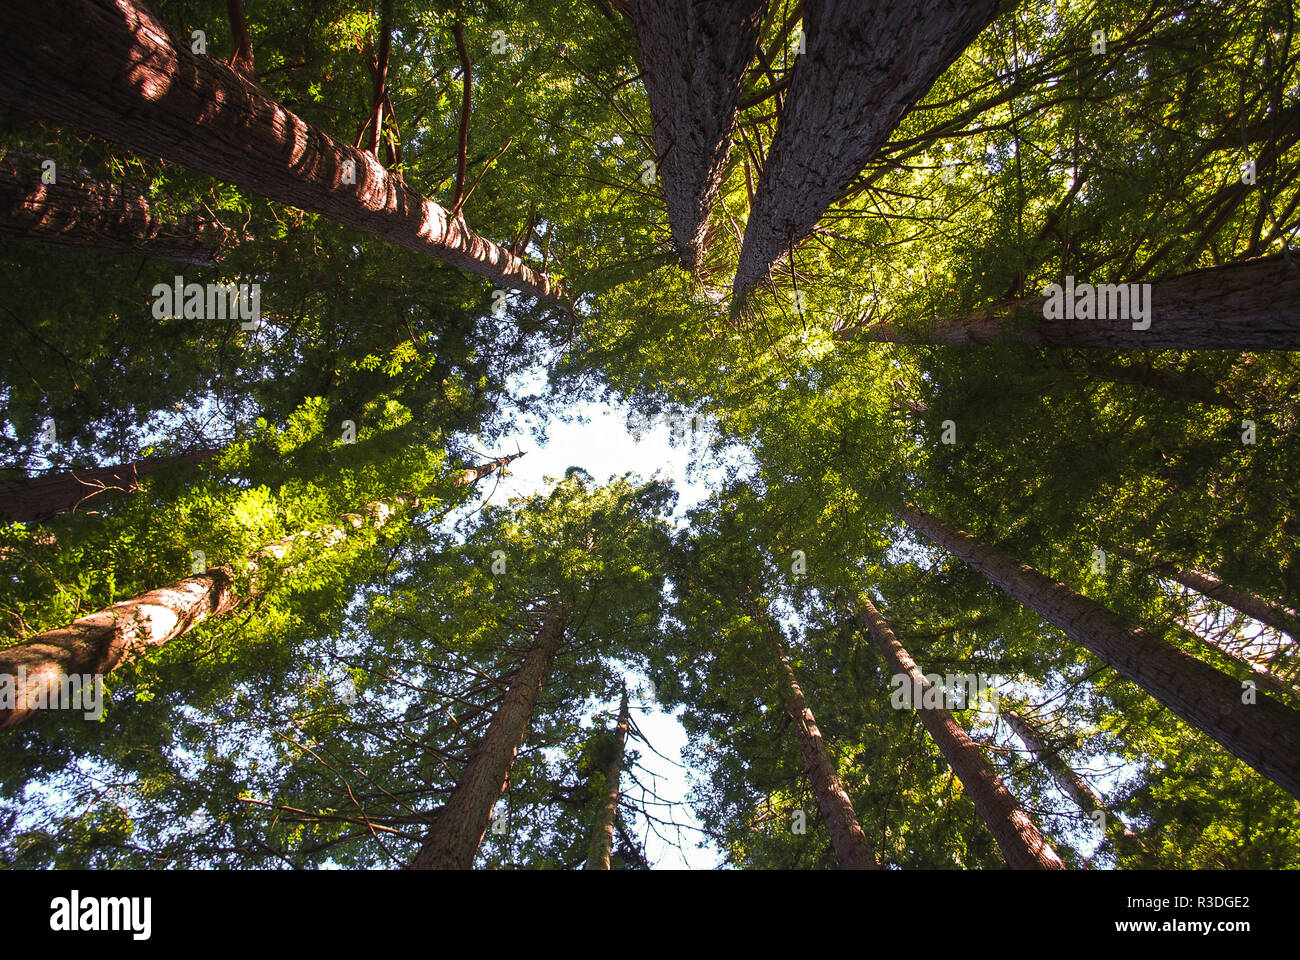 Looking up at the tall pine in the Redwoods in Rotorua, New Zealand Stock Photo